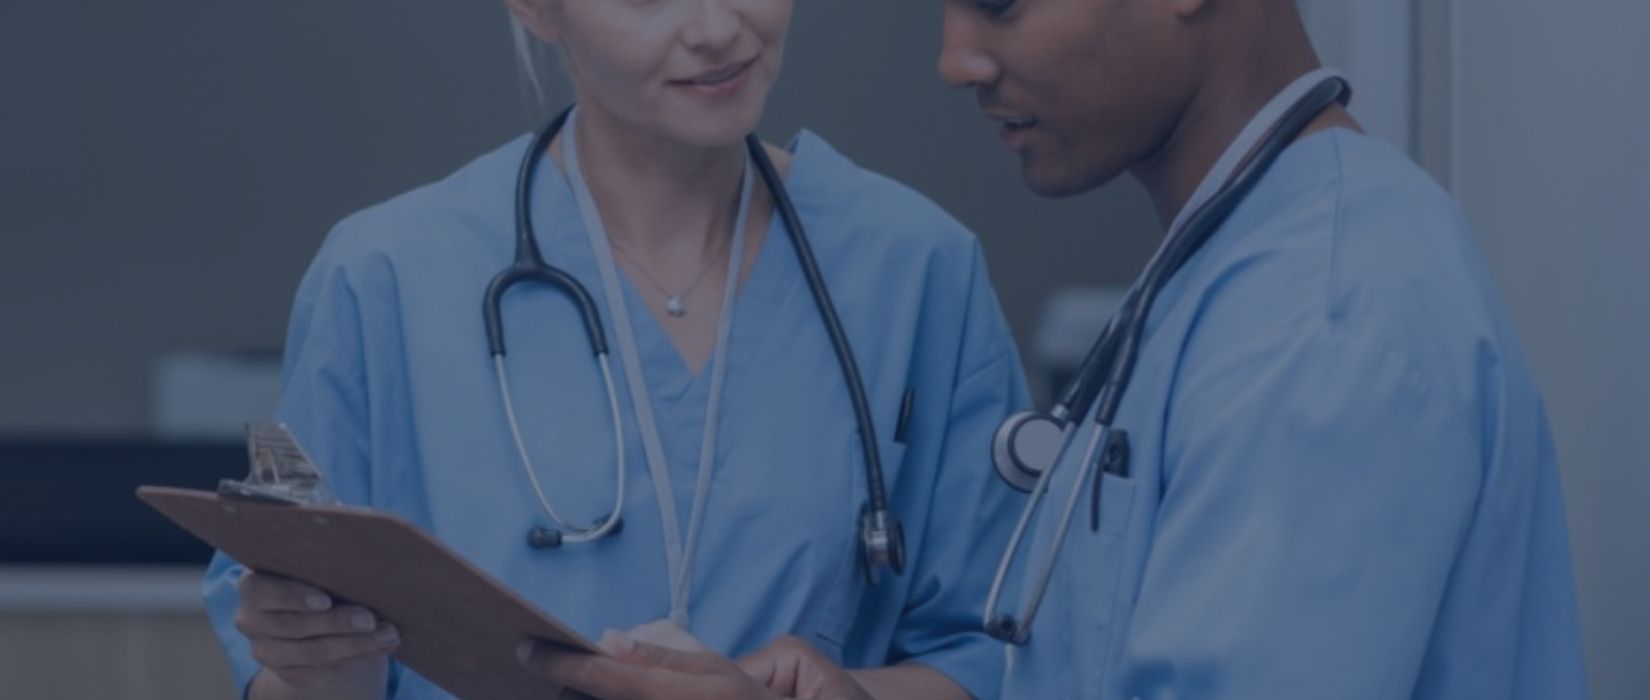 Medical Staffing: How to Engage and Retain Healthcare Workers